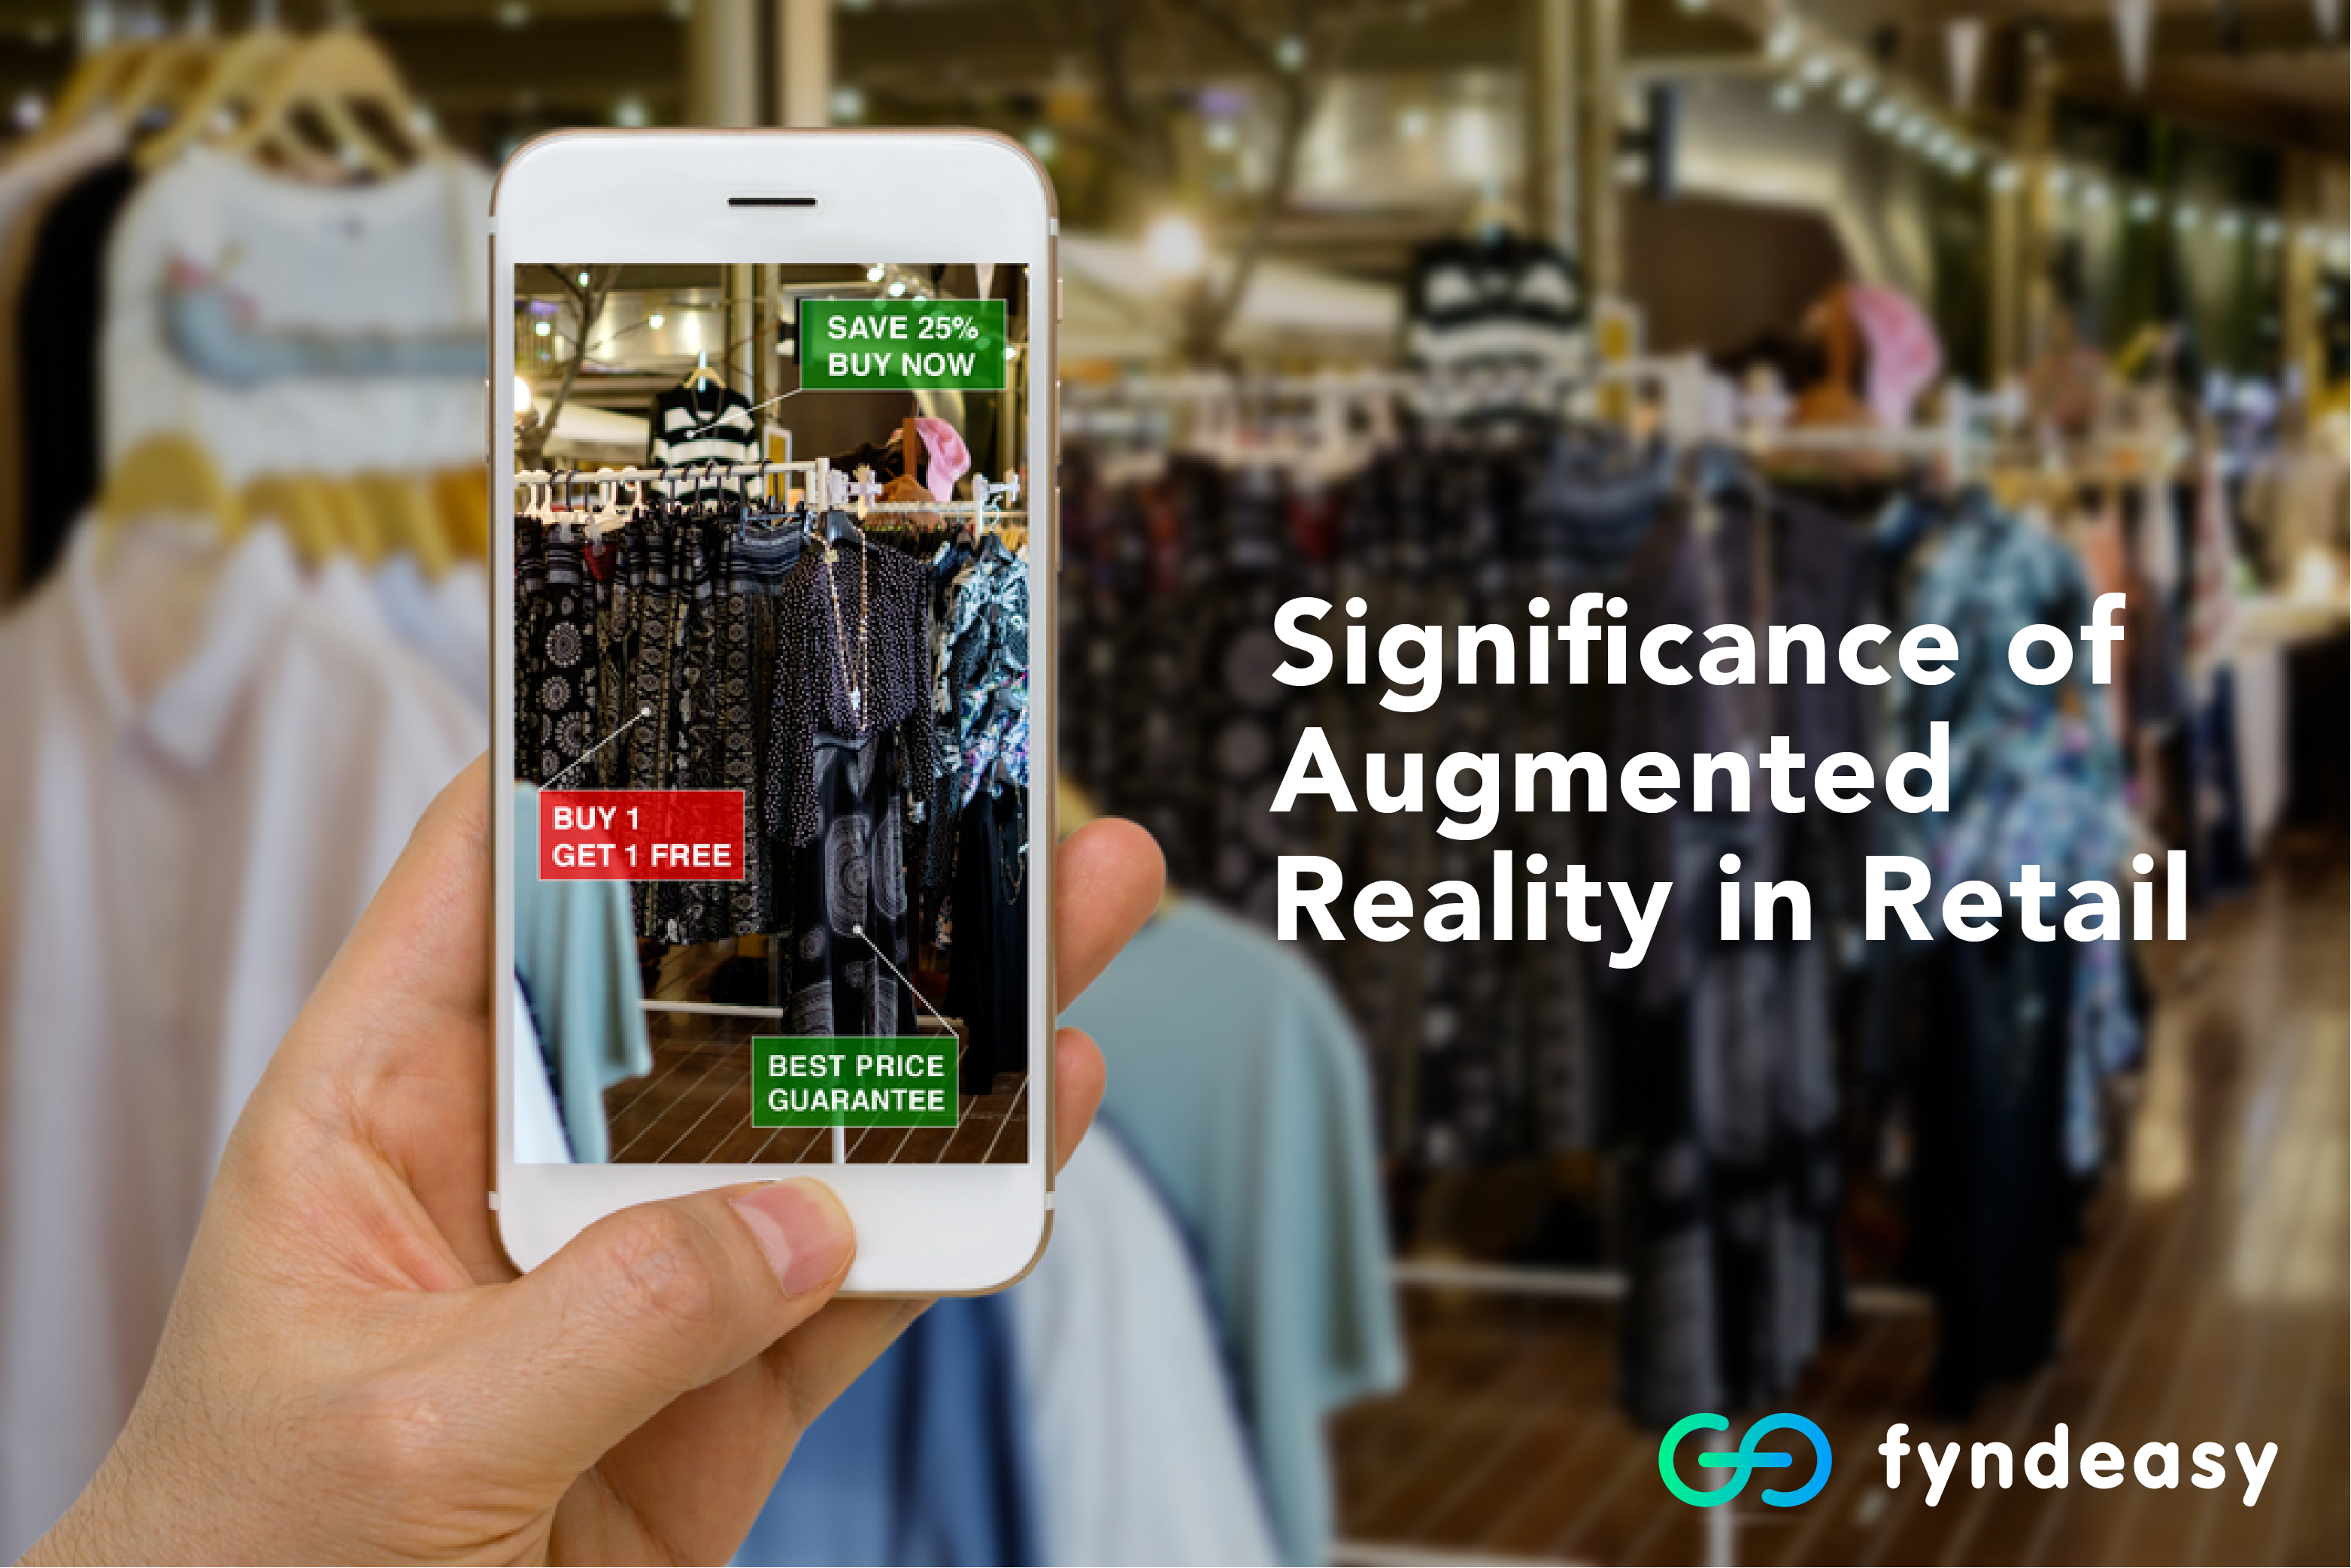 Significance of Augmented Reality in Retail